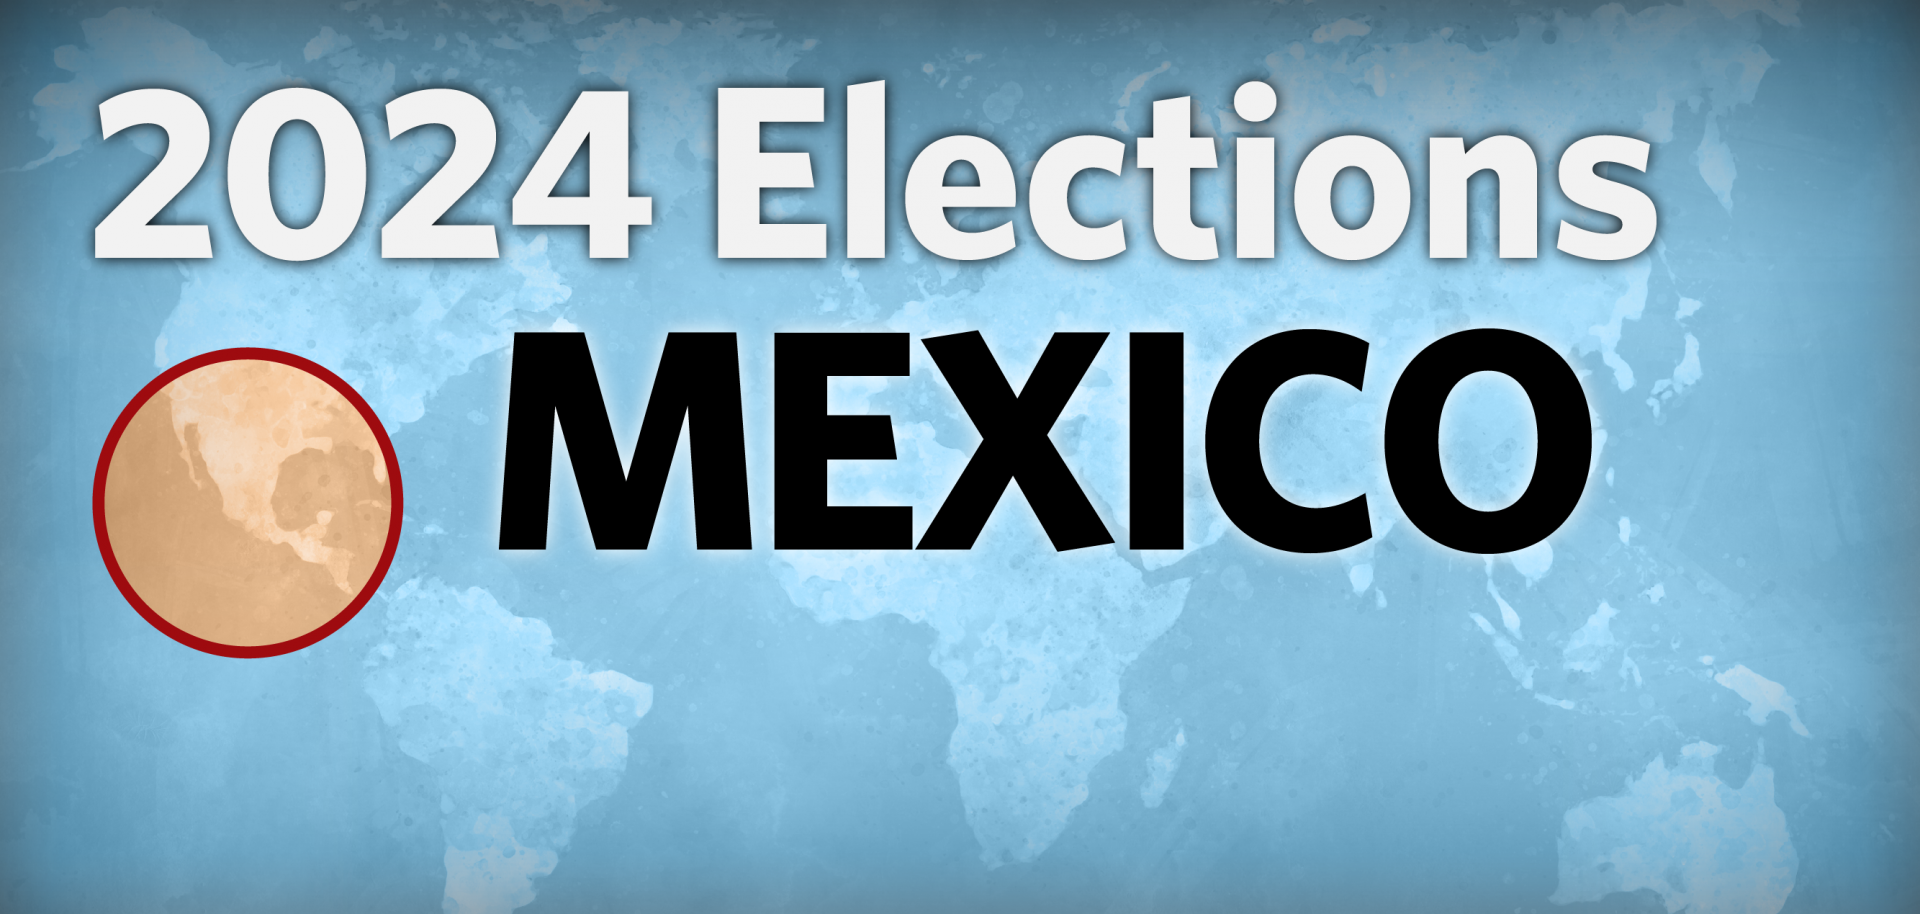 2024 Elections: Mexico